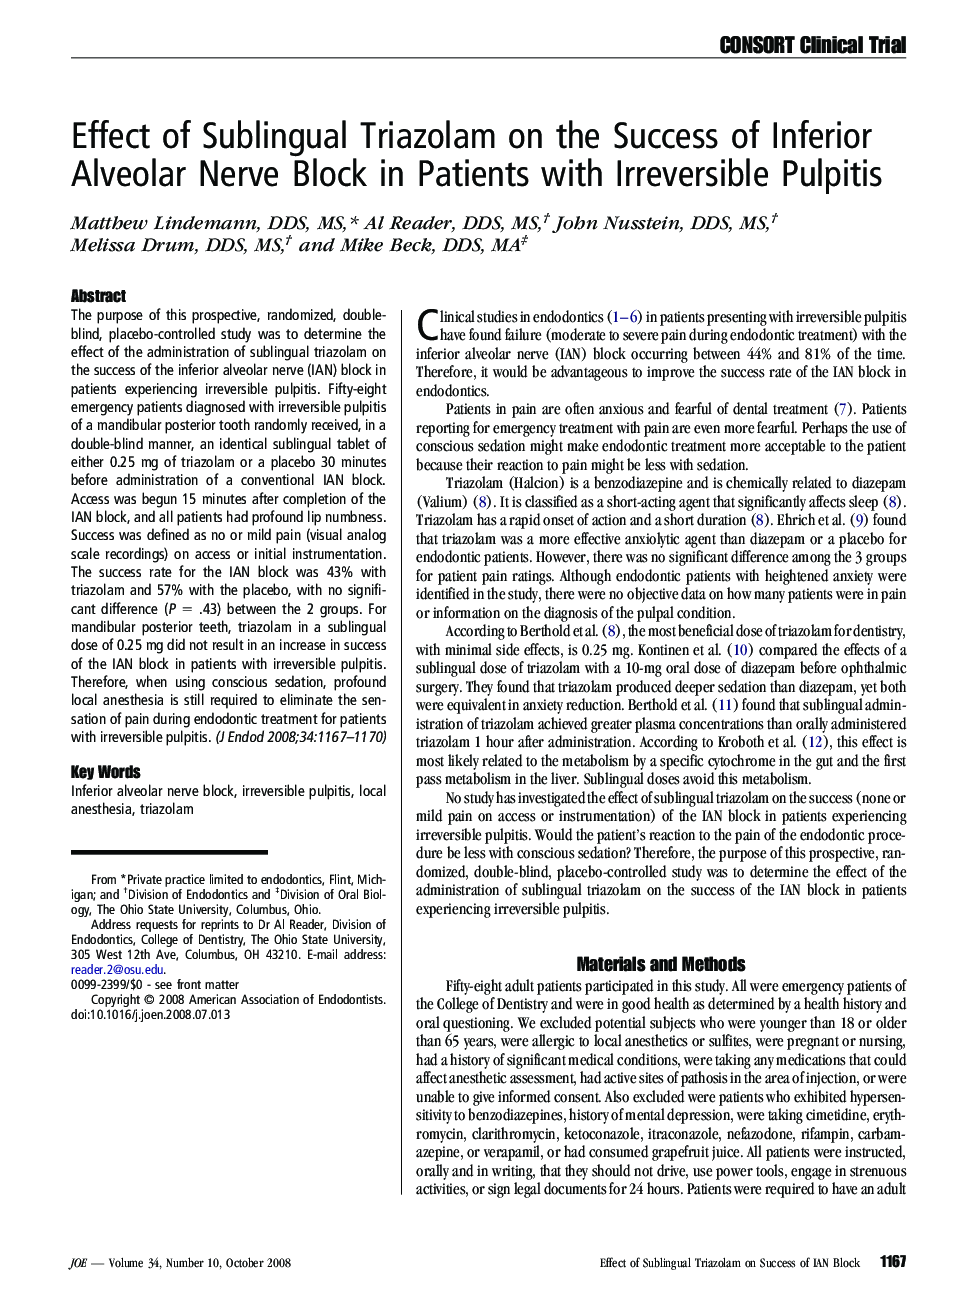 Effect of Sublingual Triazolam on the Success of Inferior Alveolar Nerve Block in Patients with Irreversible Pulpitis